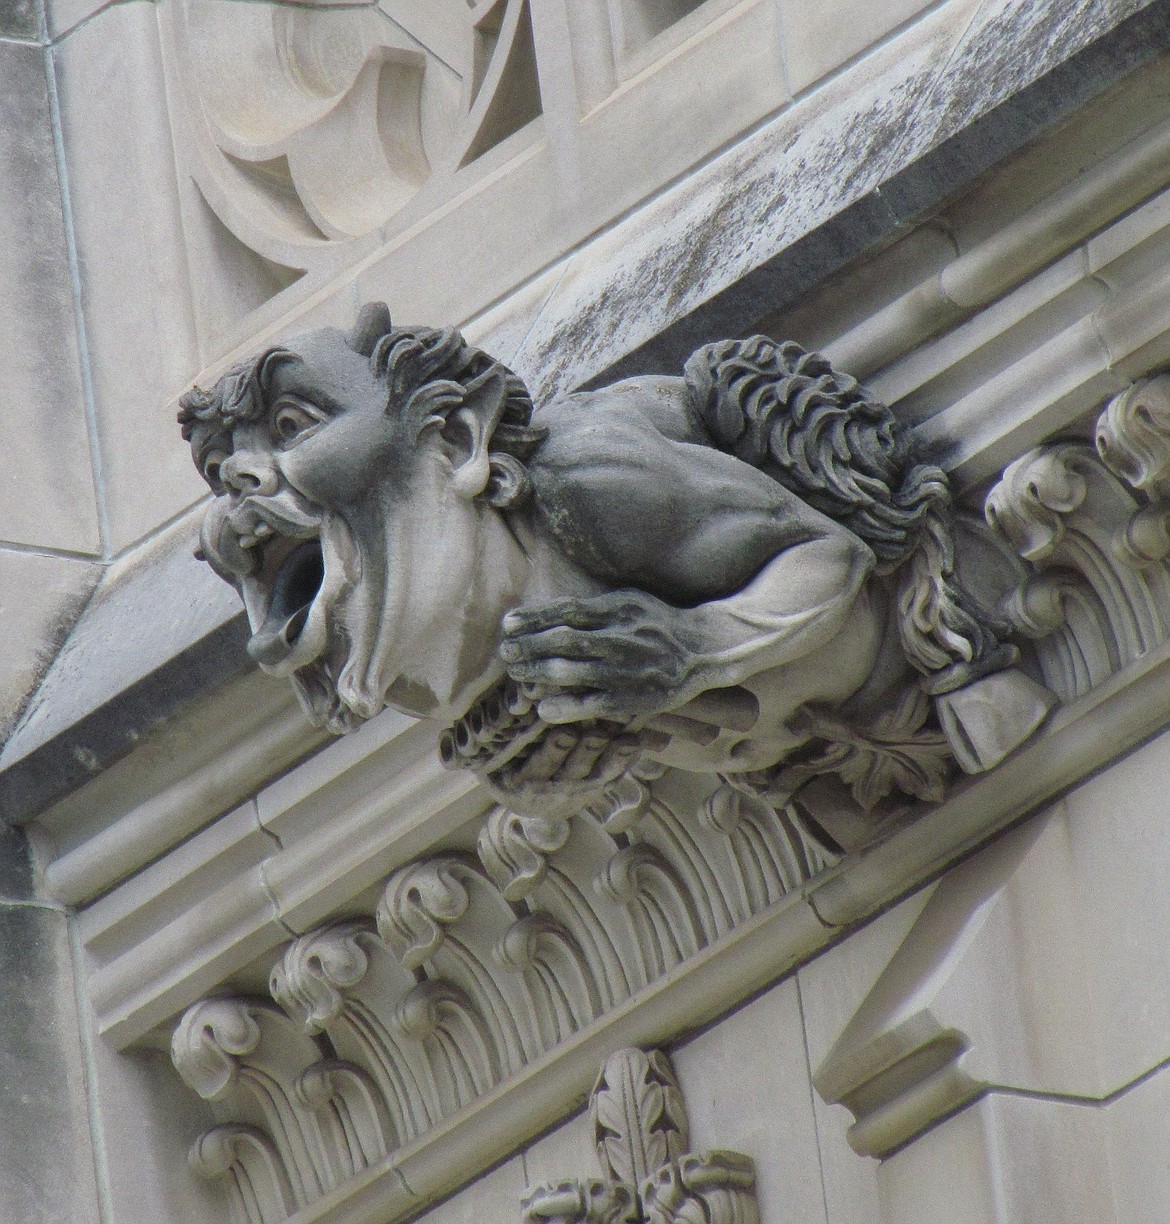 DUCKDUCKGO.COM 
 Gargoyle serving as a rainspout on the National Cathedral in Washington, D.C., to direct rain water away from the structure.